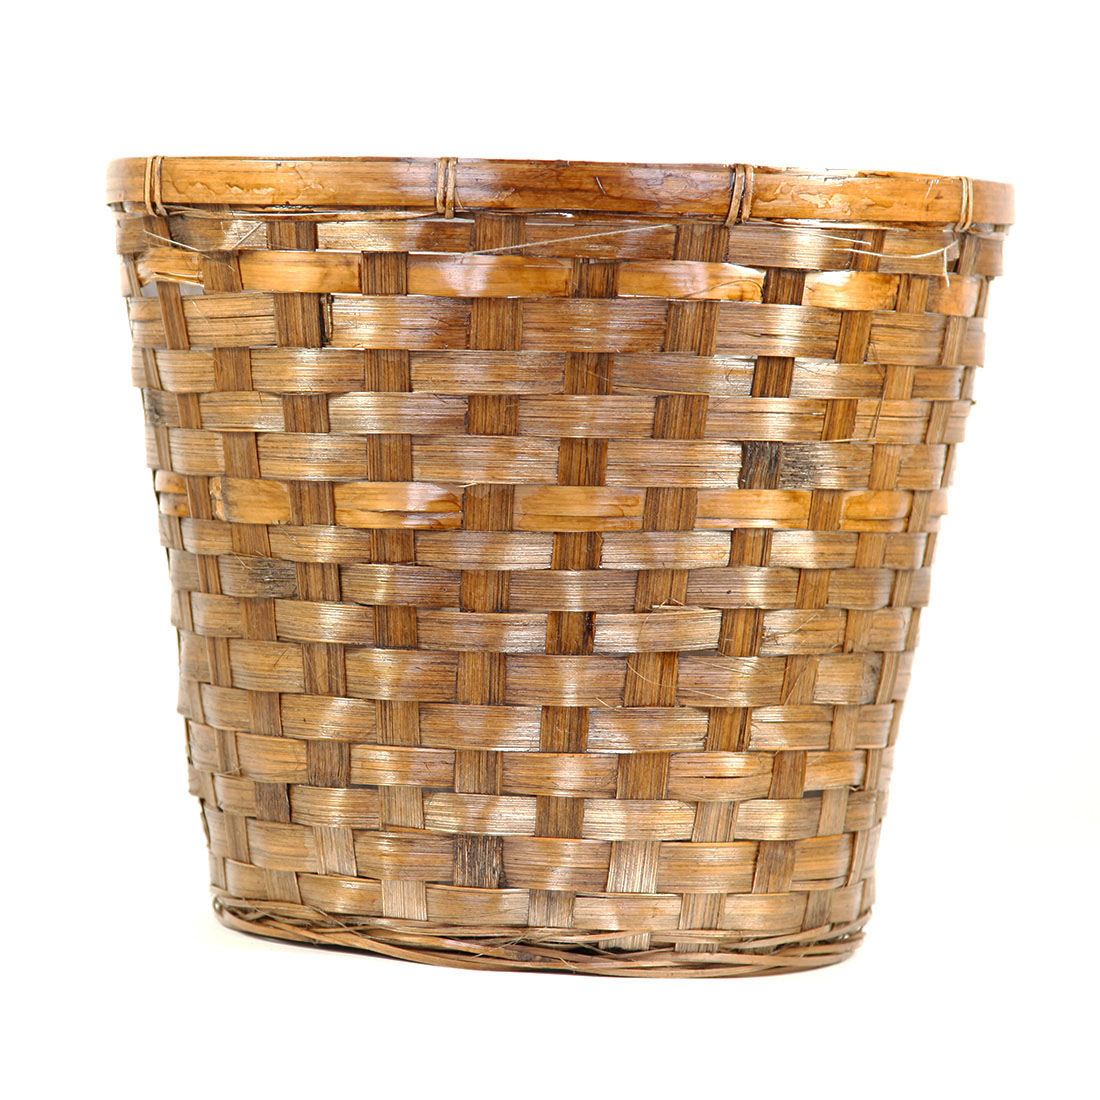 12 Inch Bamboo Basket: Fits 10 Inch Pots - Overstock